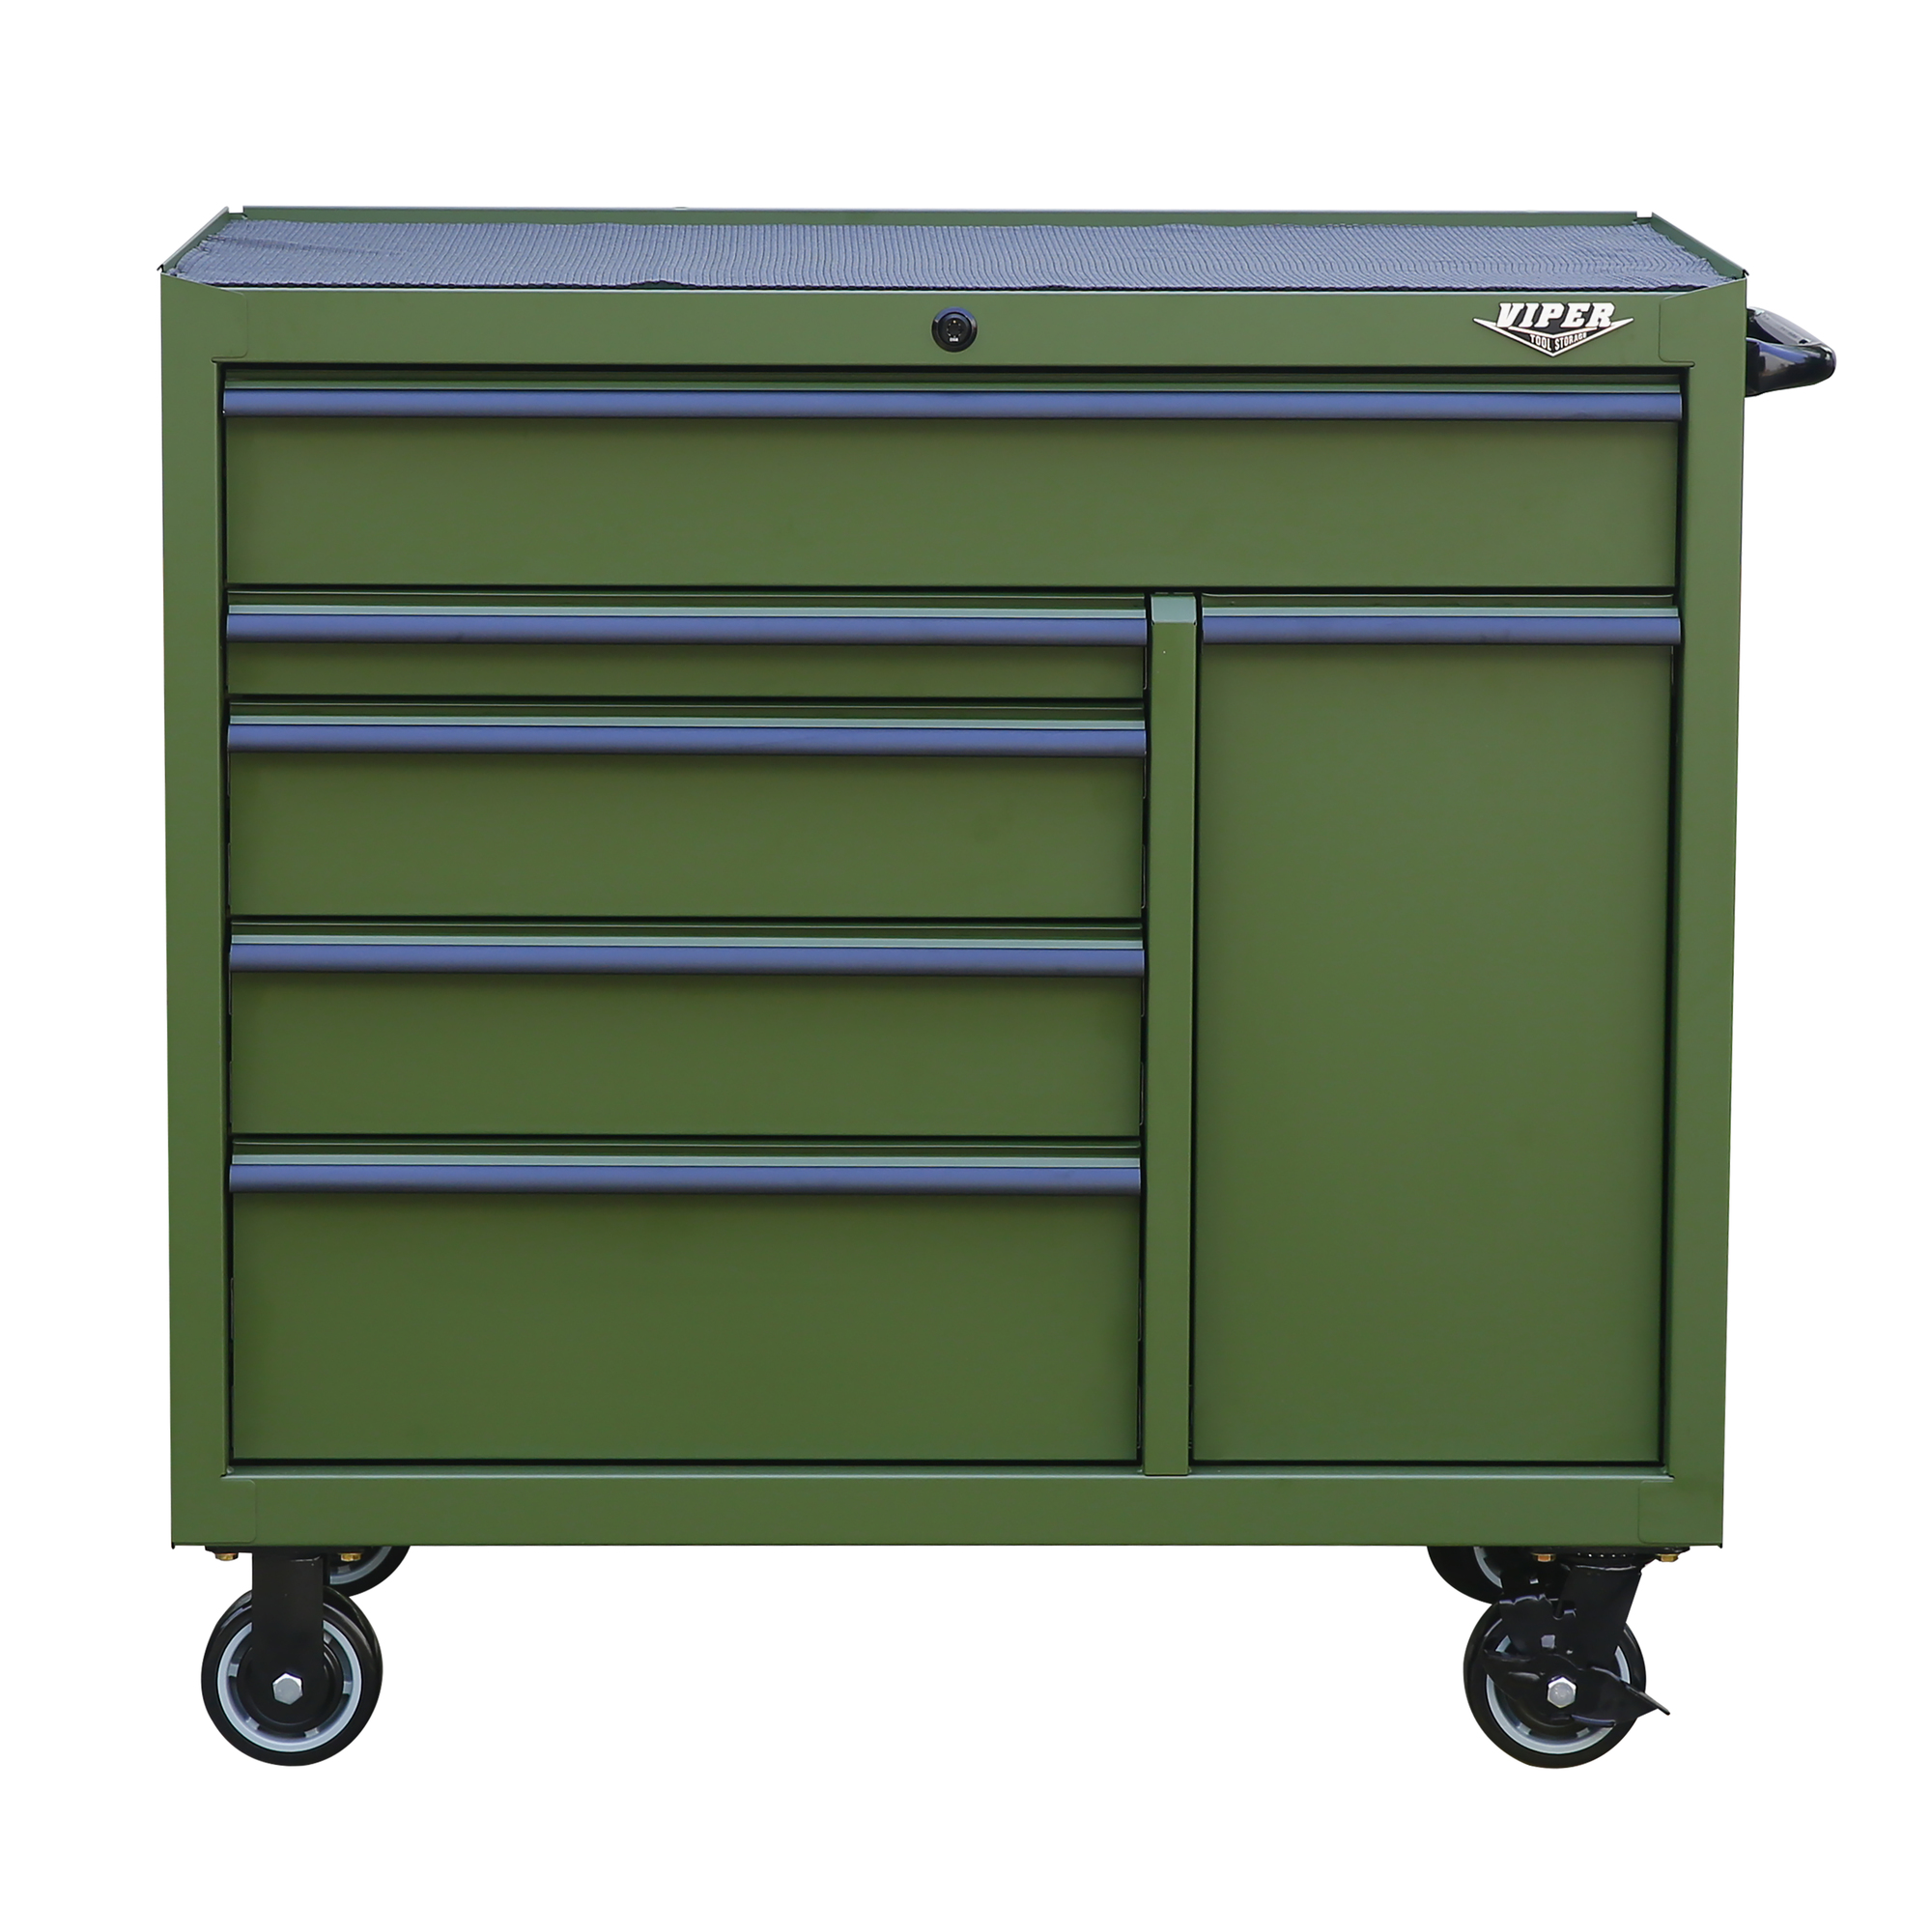 Viper Tool Storage, 6-Drawer Rolling Cabinet, Army Green, Width 41.5 in, Height 40.75 in, Color Green, Model V4106ARGR